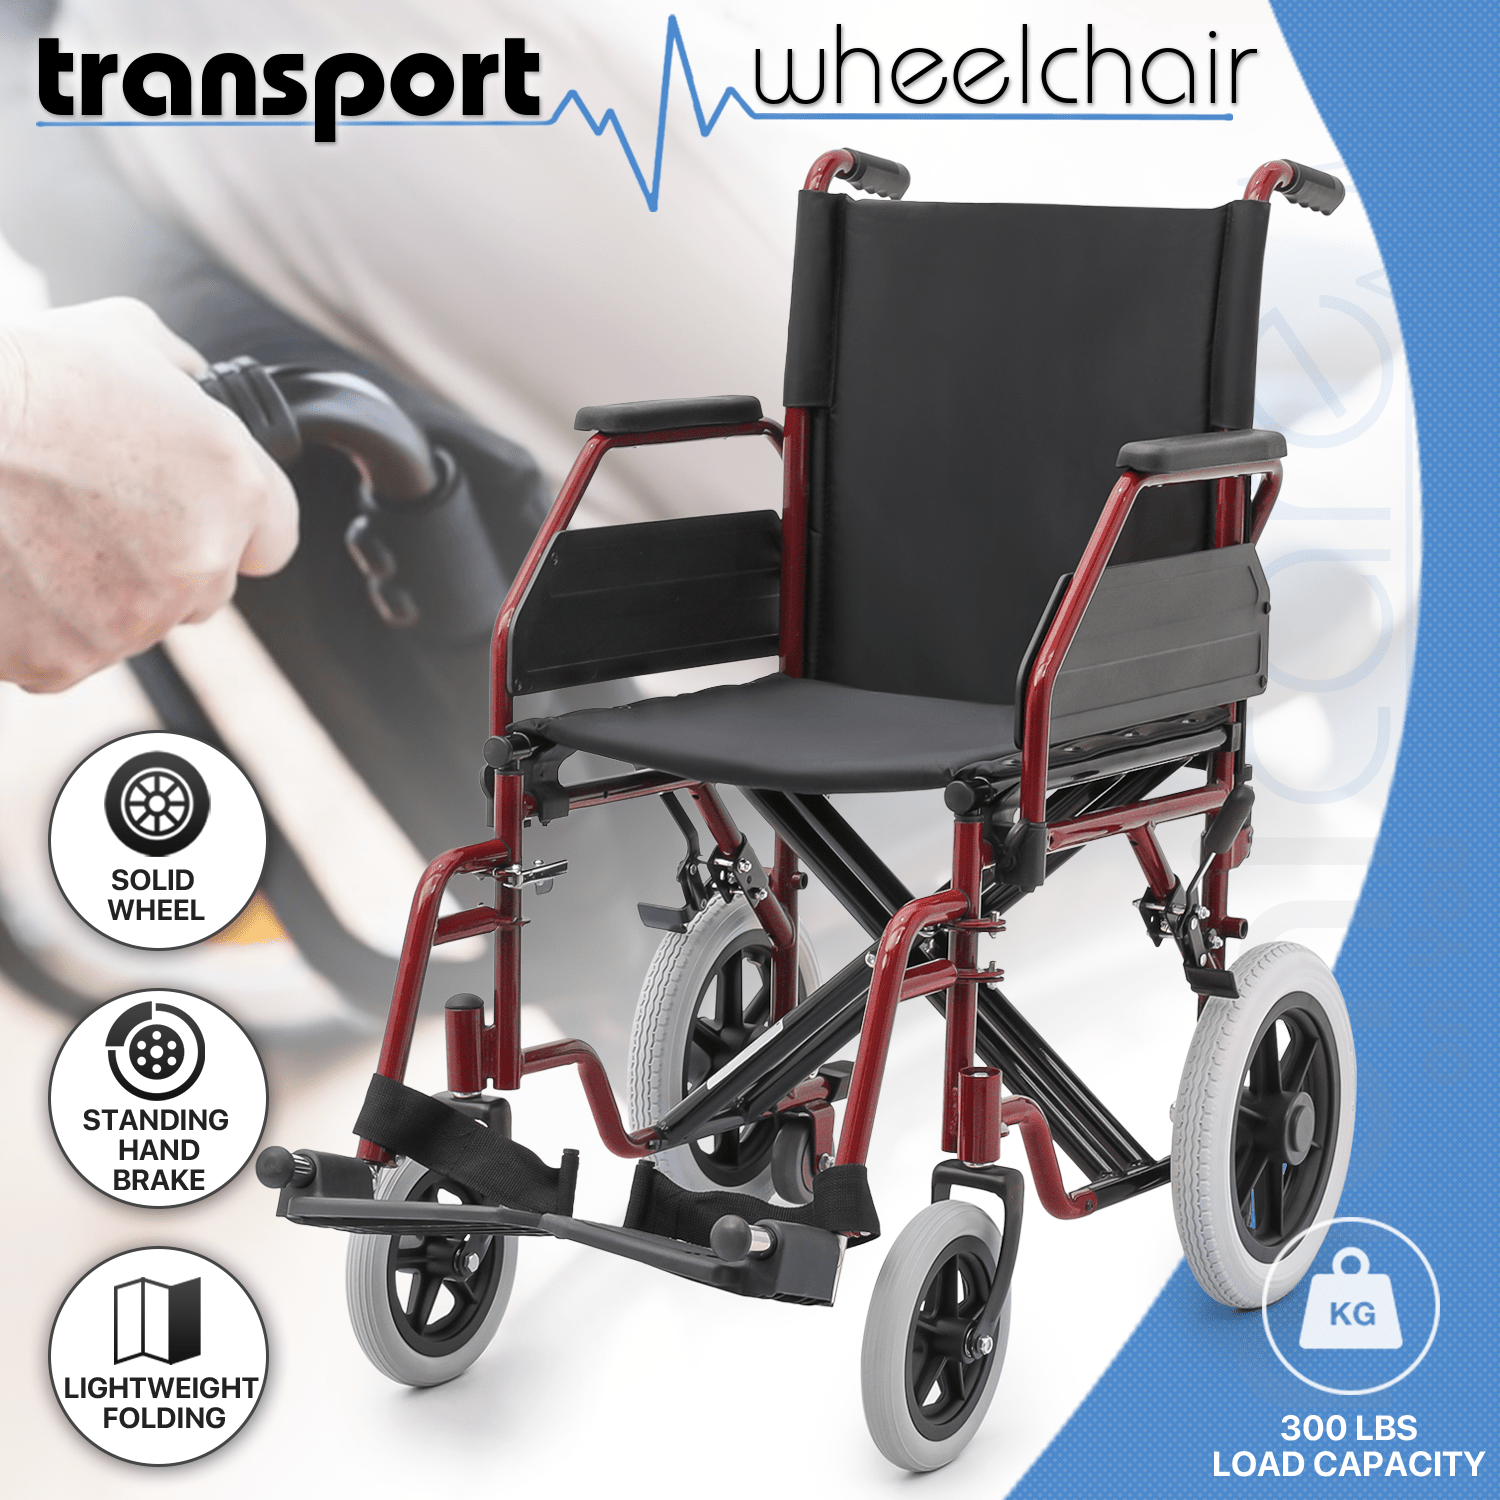 

Transport Wheelchair, Portable Folding Wheel Chair With Flip-back Armrest And Foot Leg Rest, Steel Frame Nylon Seat, 17 Icnh Wide Seat Chair For Travel Elder Use